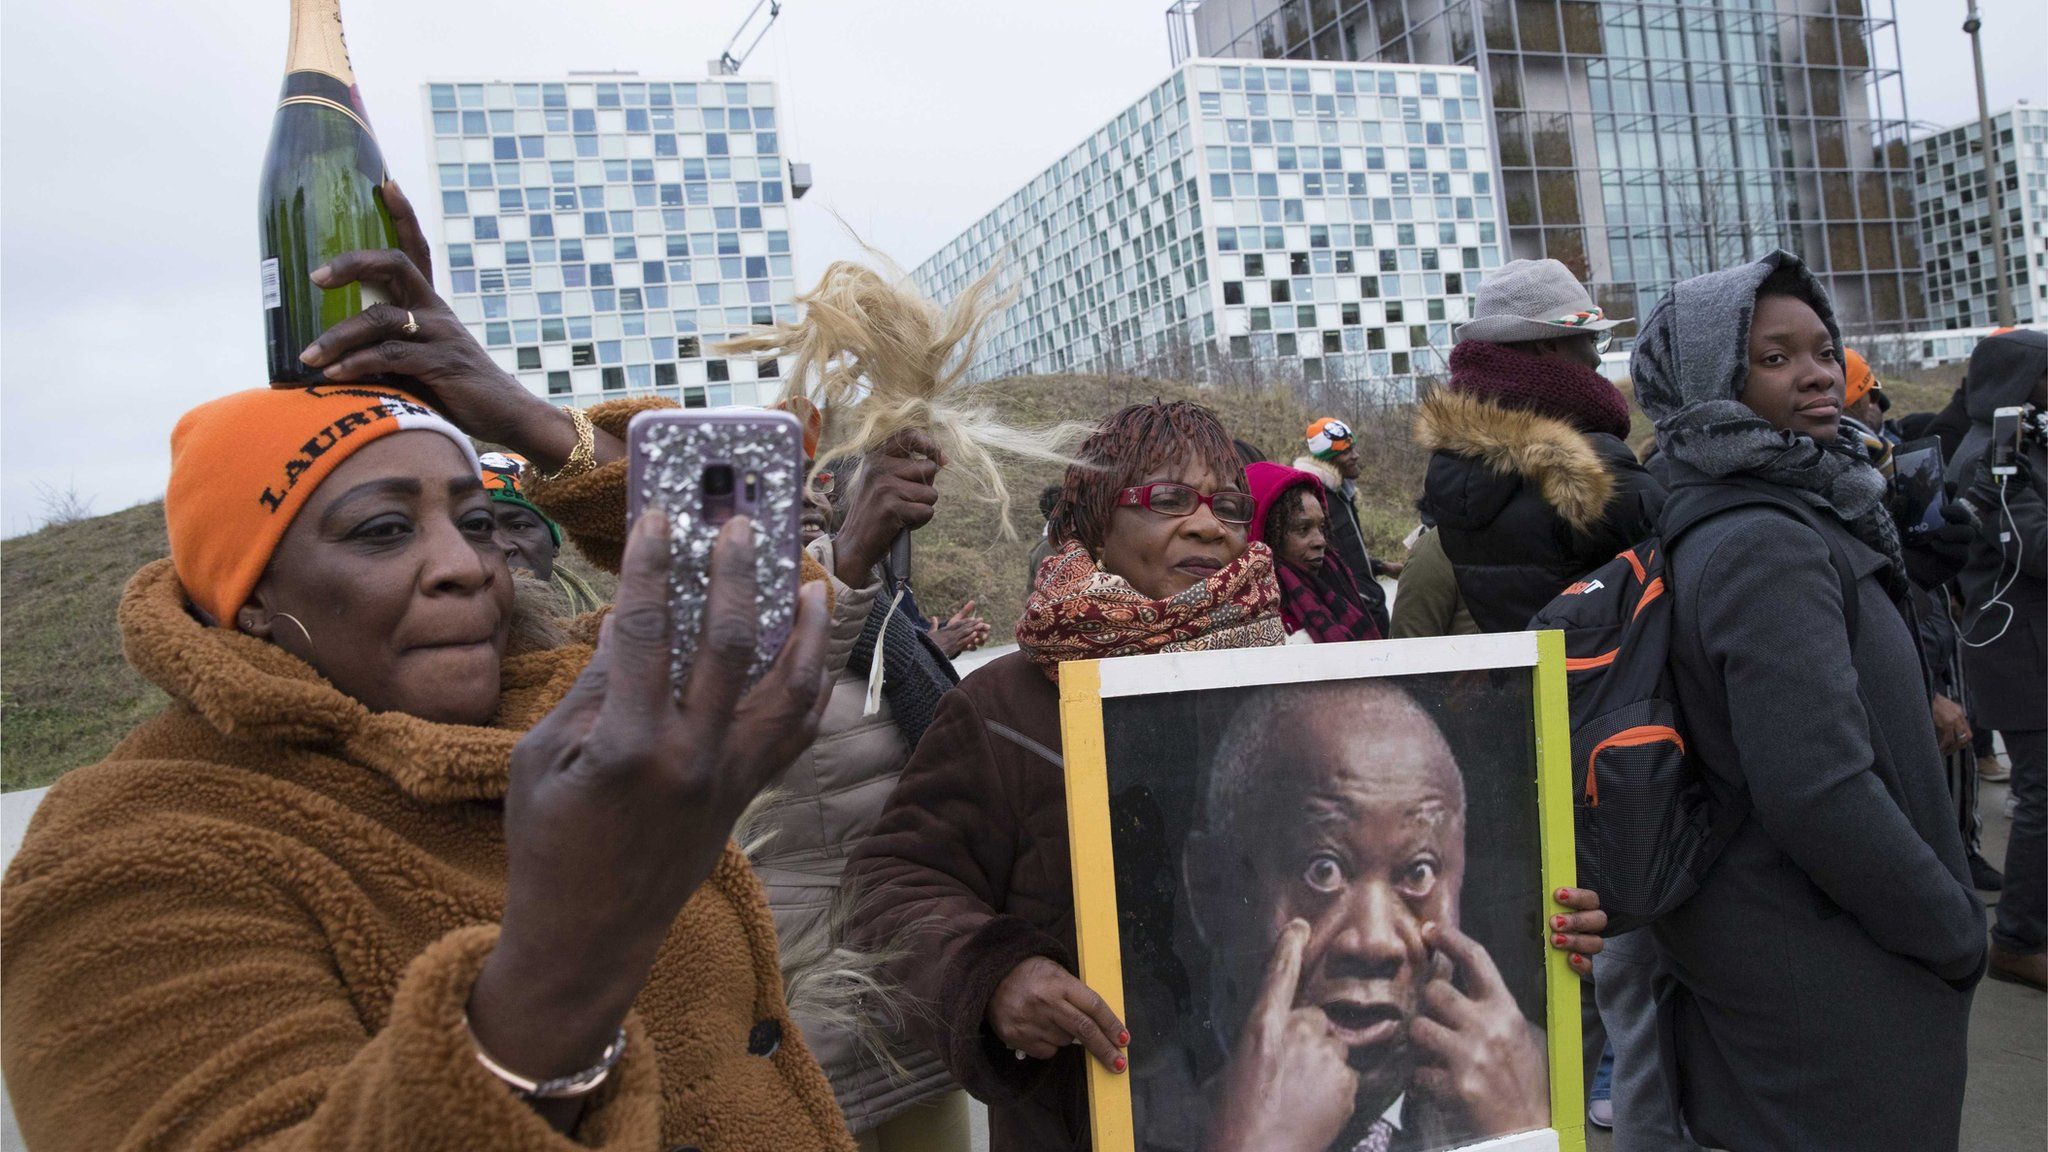 Supporters of Laurent Gbagbo rally outside the ICC, holding up a photo of him and a bottle of champagne